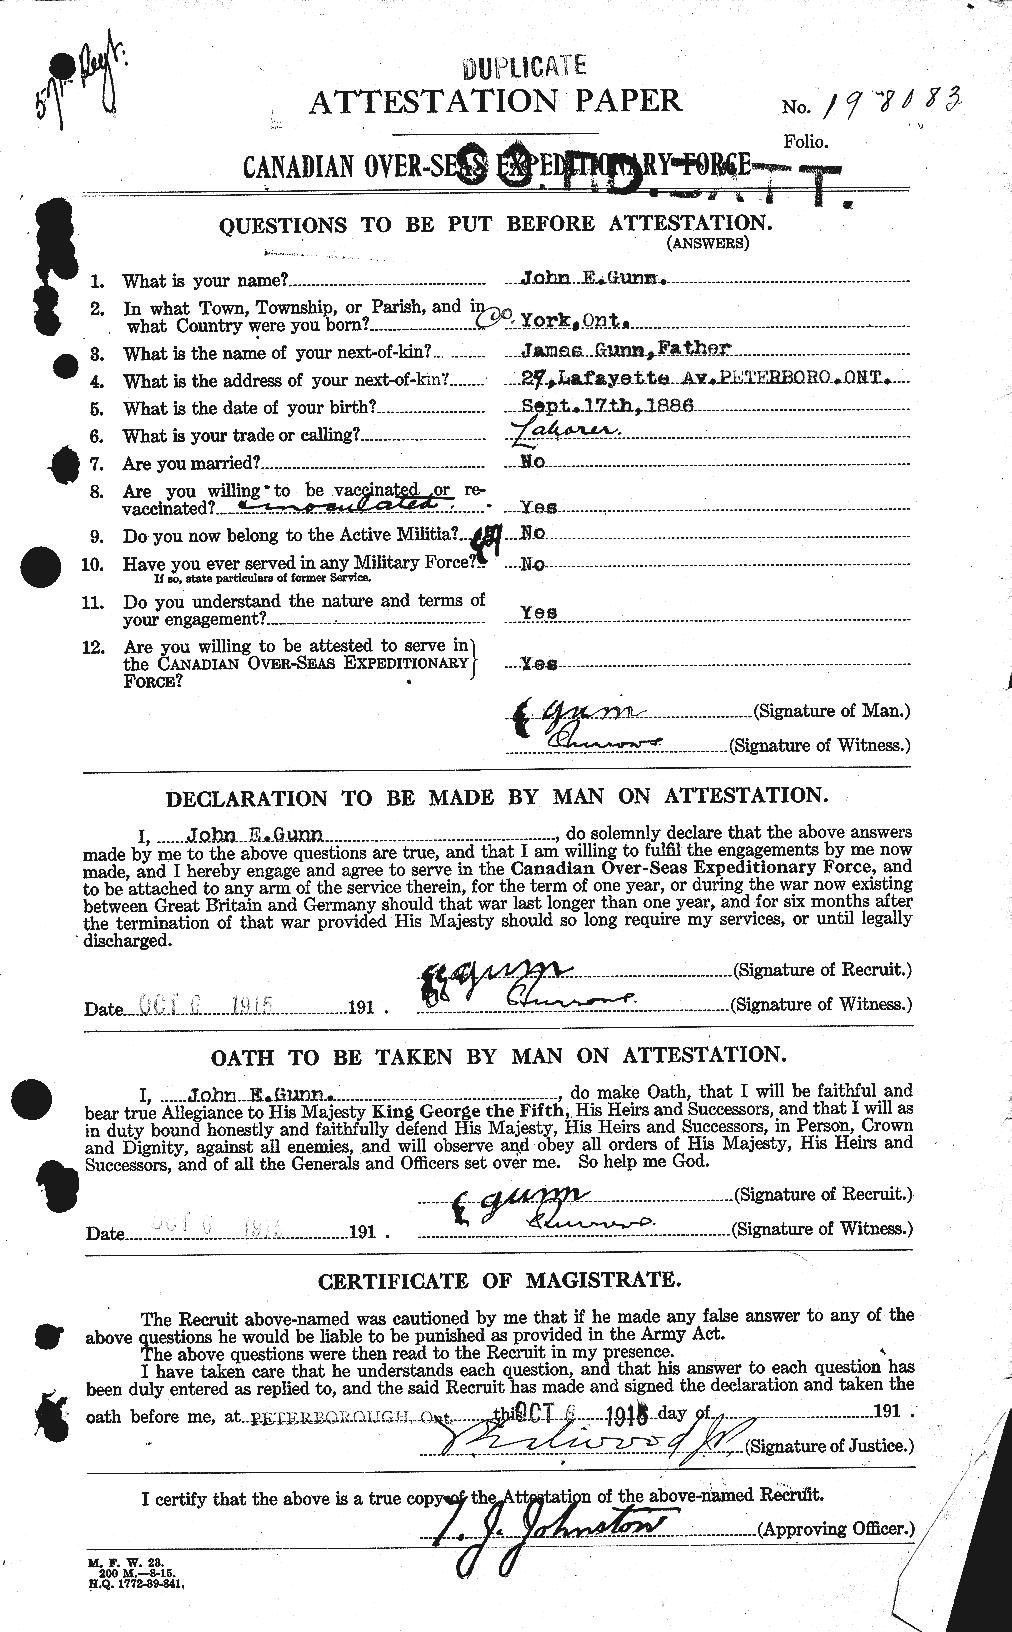 Personnel Records of the First World War - CEF 369294a